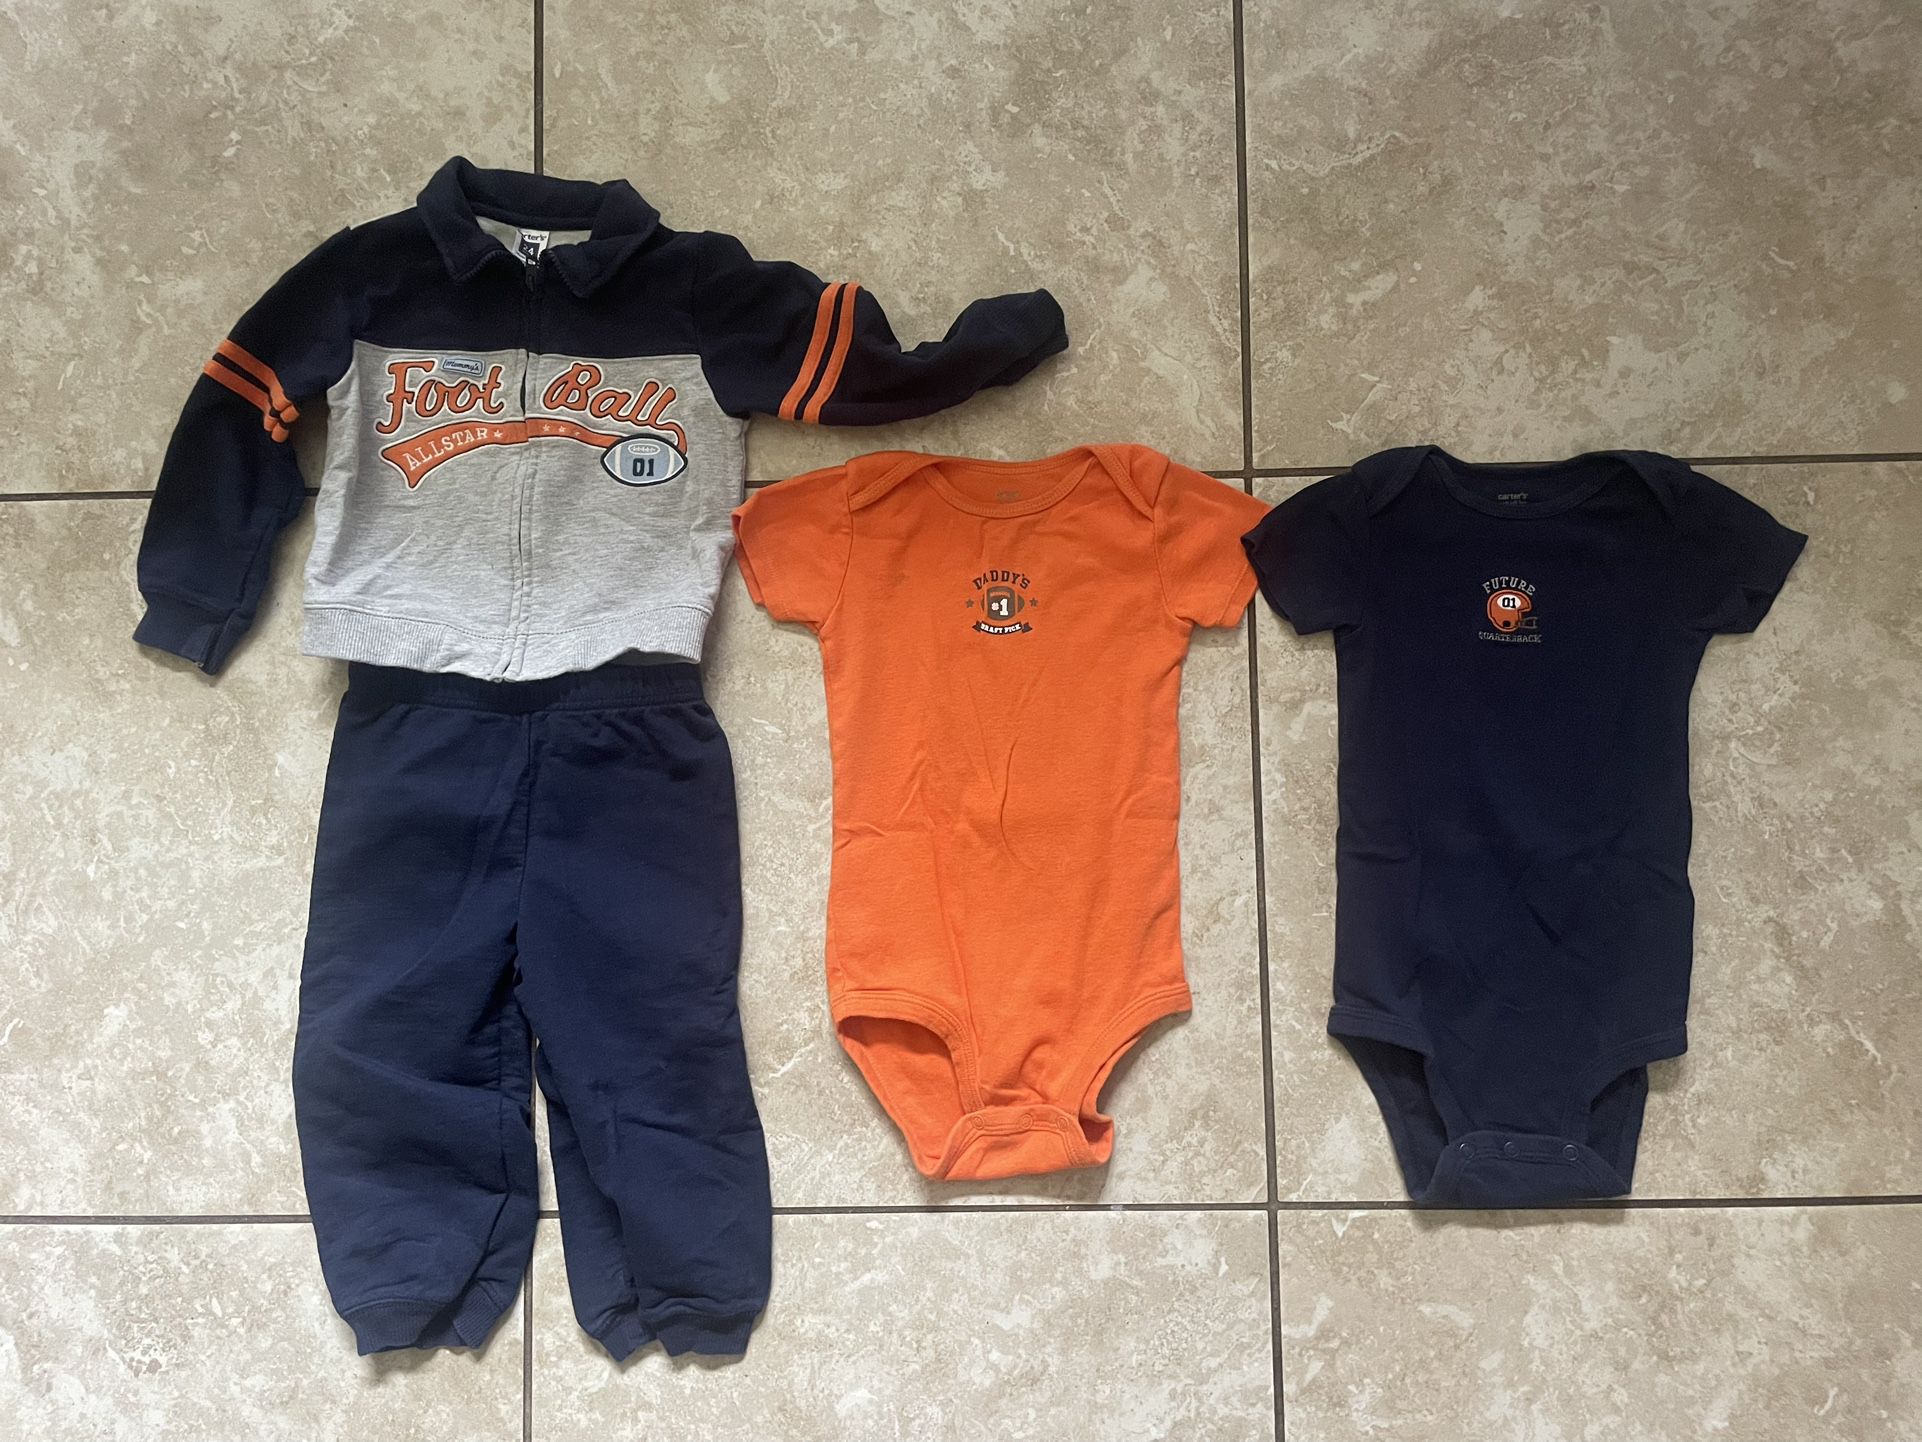 24 Month Baby Clothes